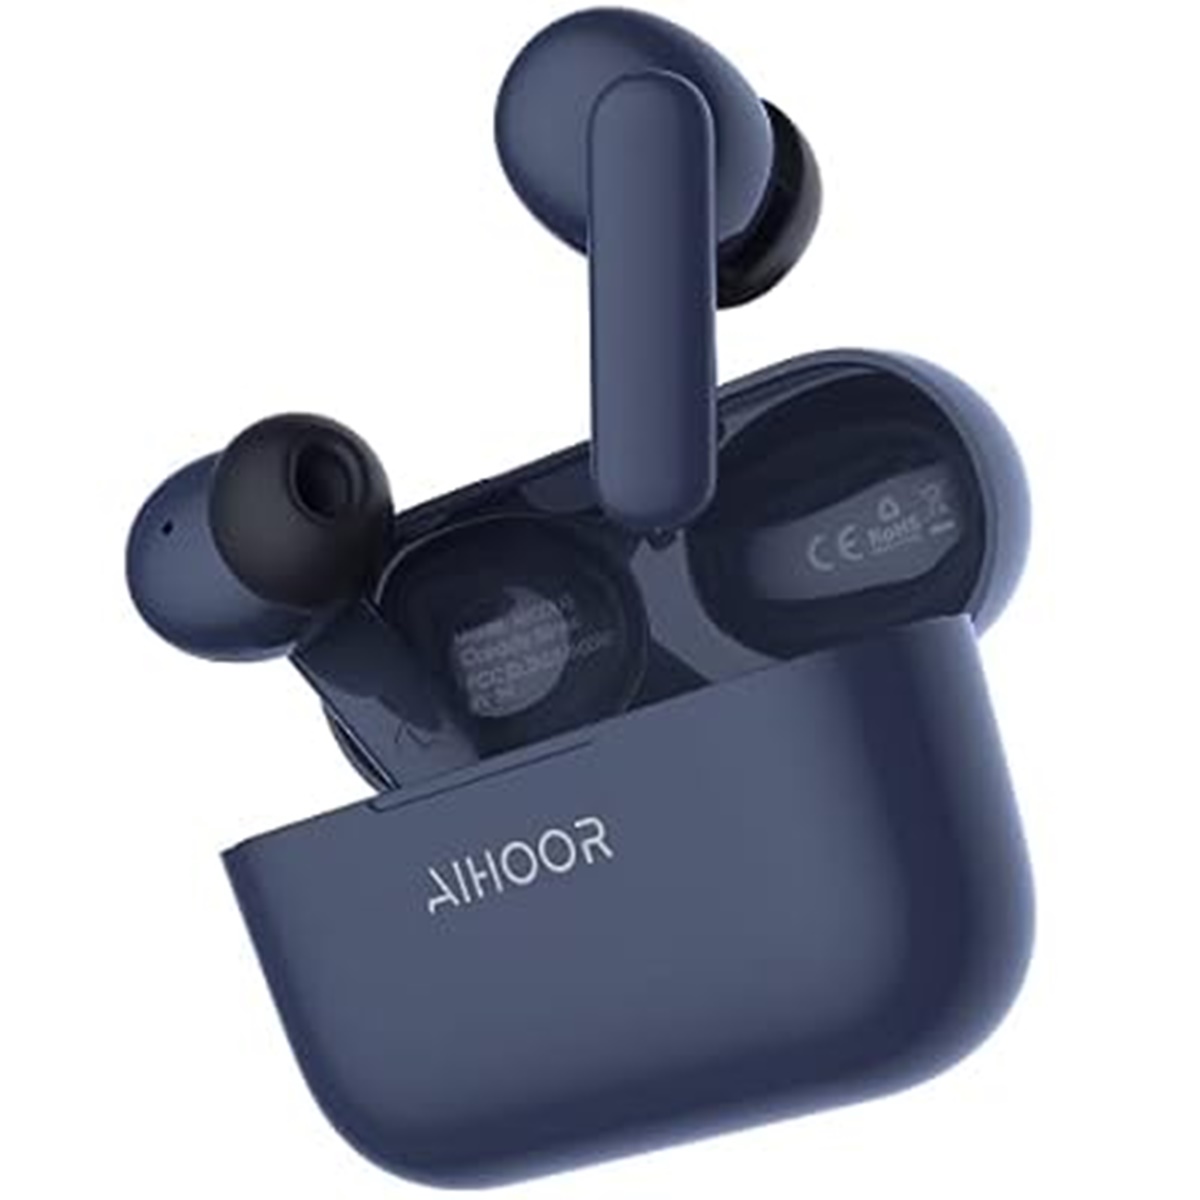 14 Amazing Wireless Earbuds Under 30 Dollars for 2023 | CellularNews